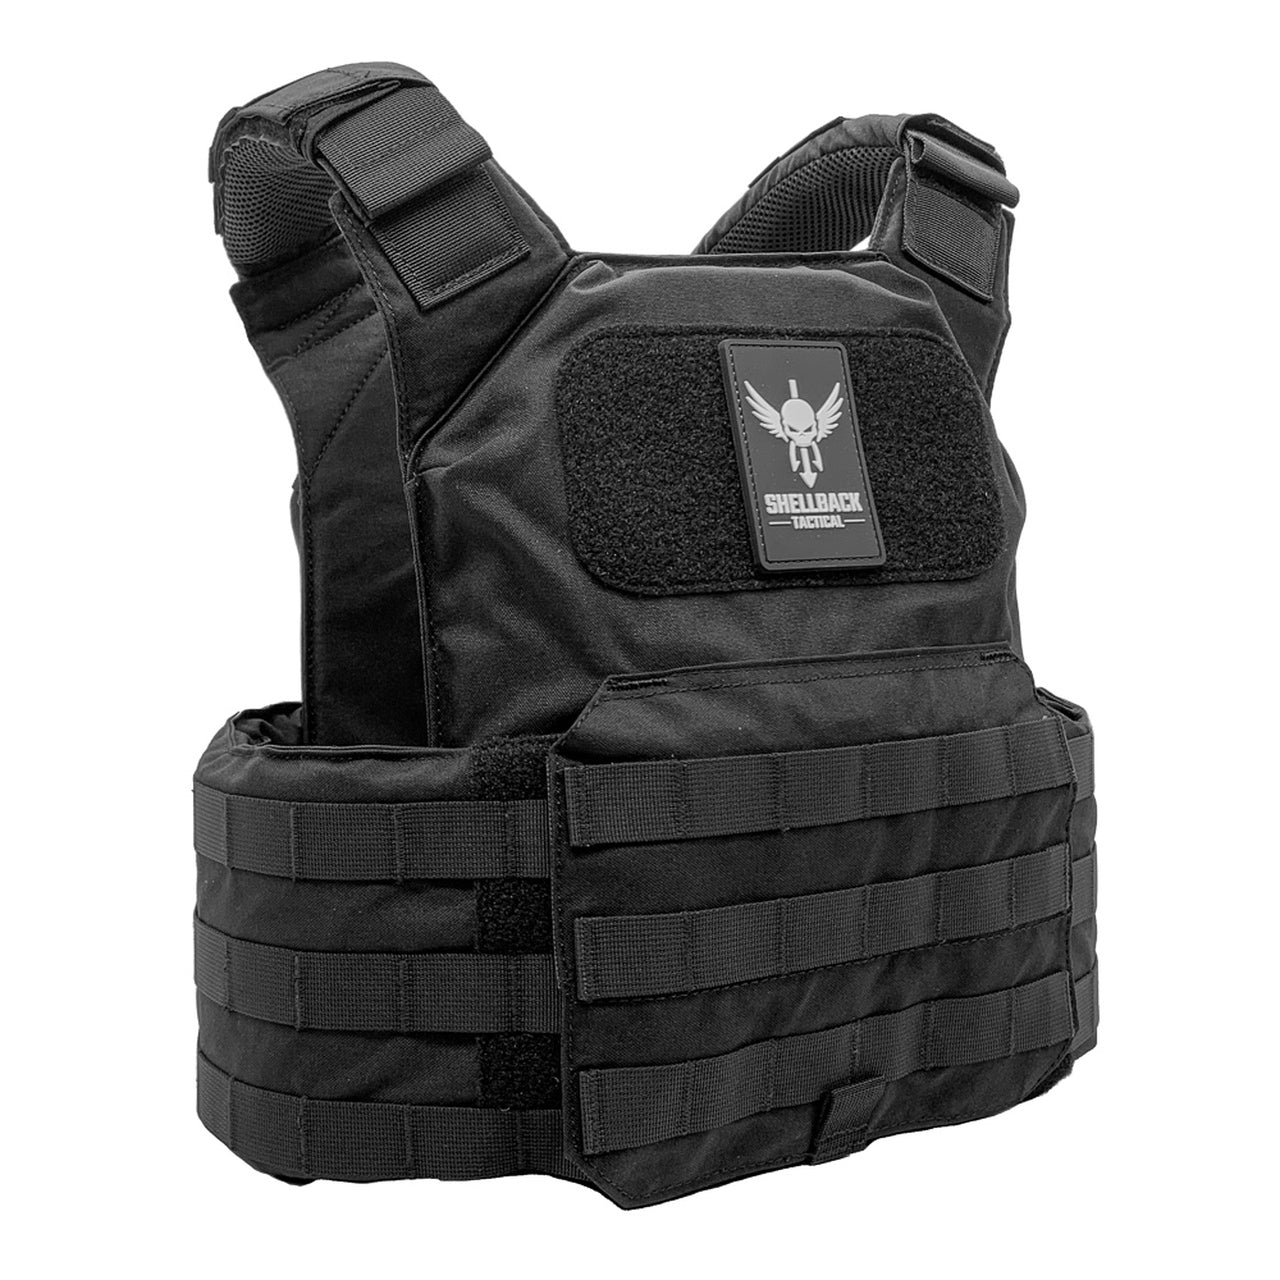 A Shellback Tactical Shield Plate Carrier on a white background.